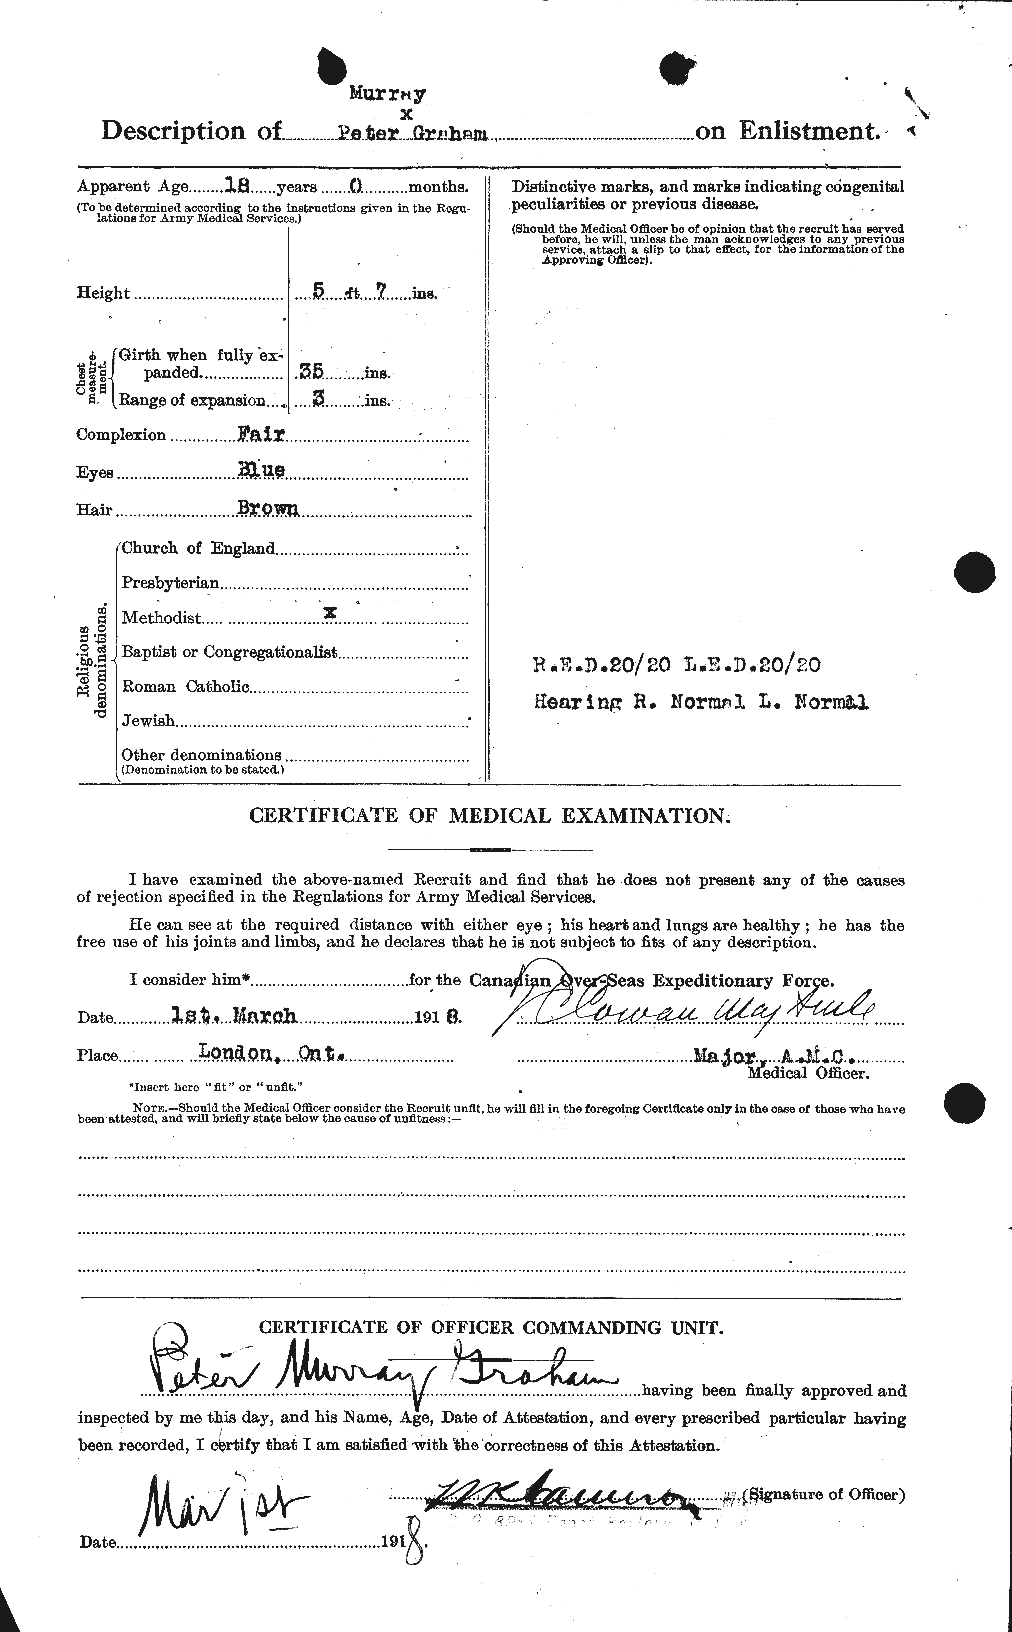 Personnel Records of the First World War - CEF 359350b